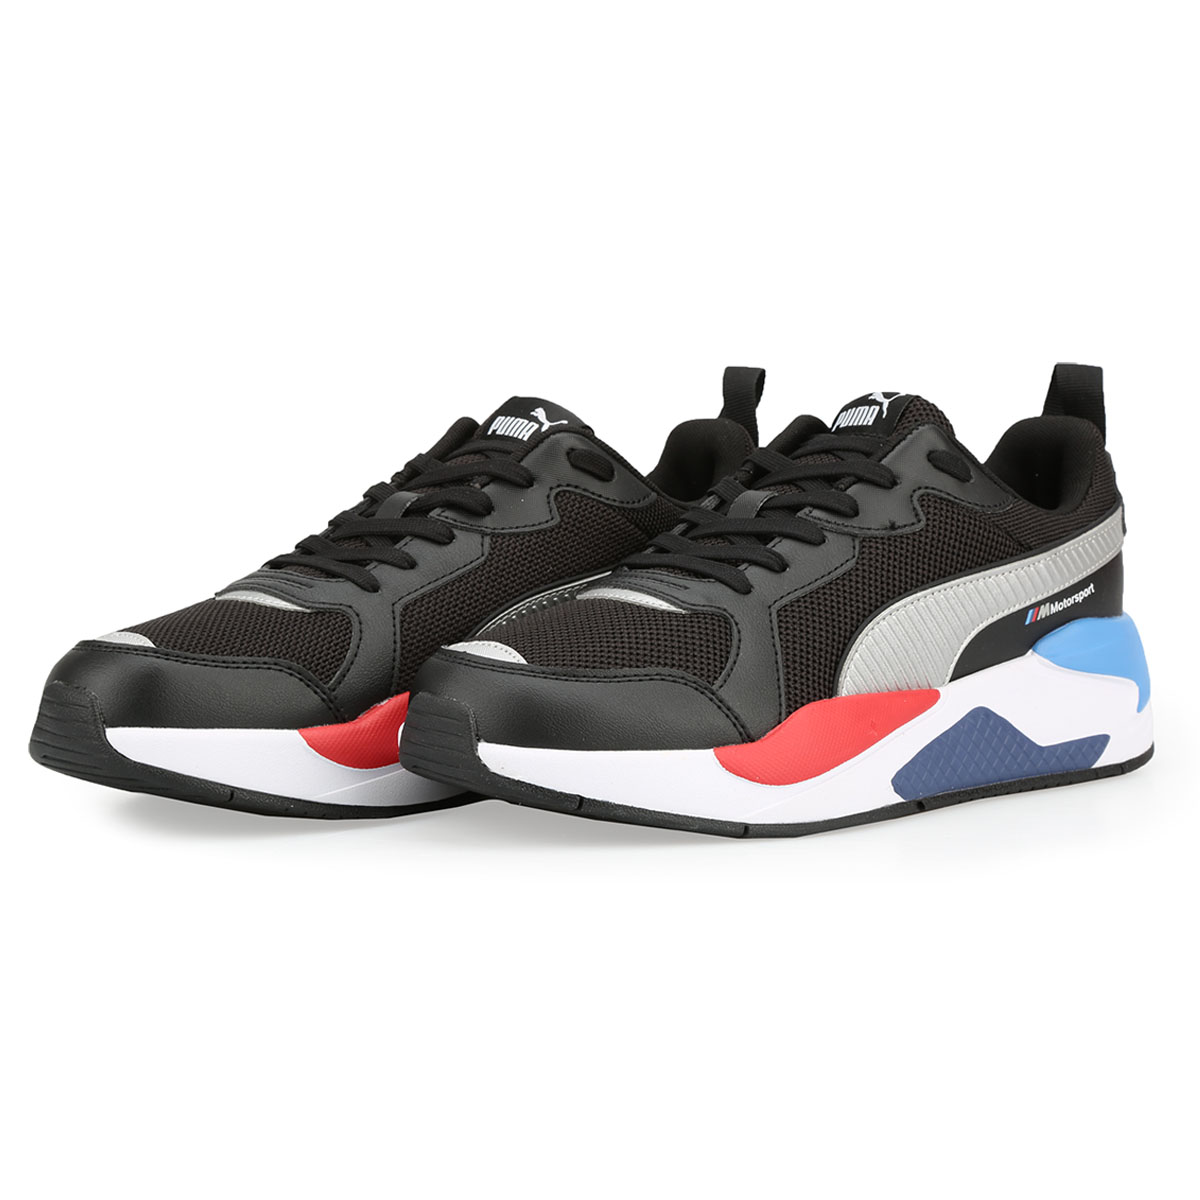 Zapatillas Puma Bmw Mms X-Ray,  image number null